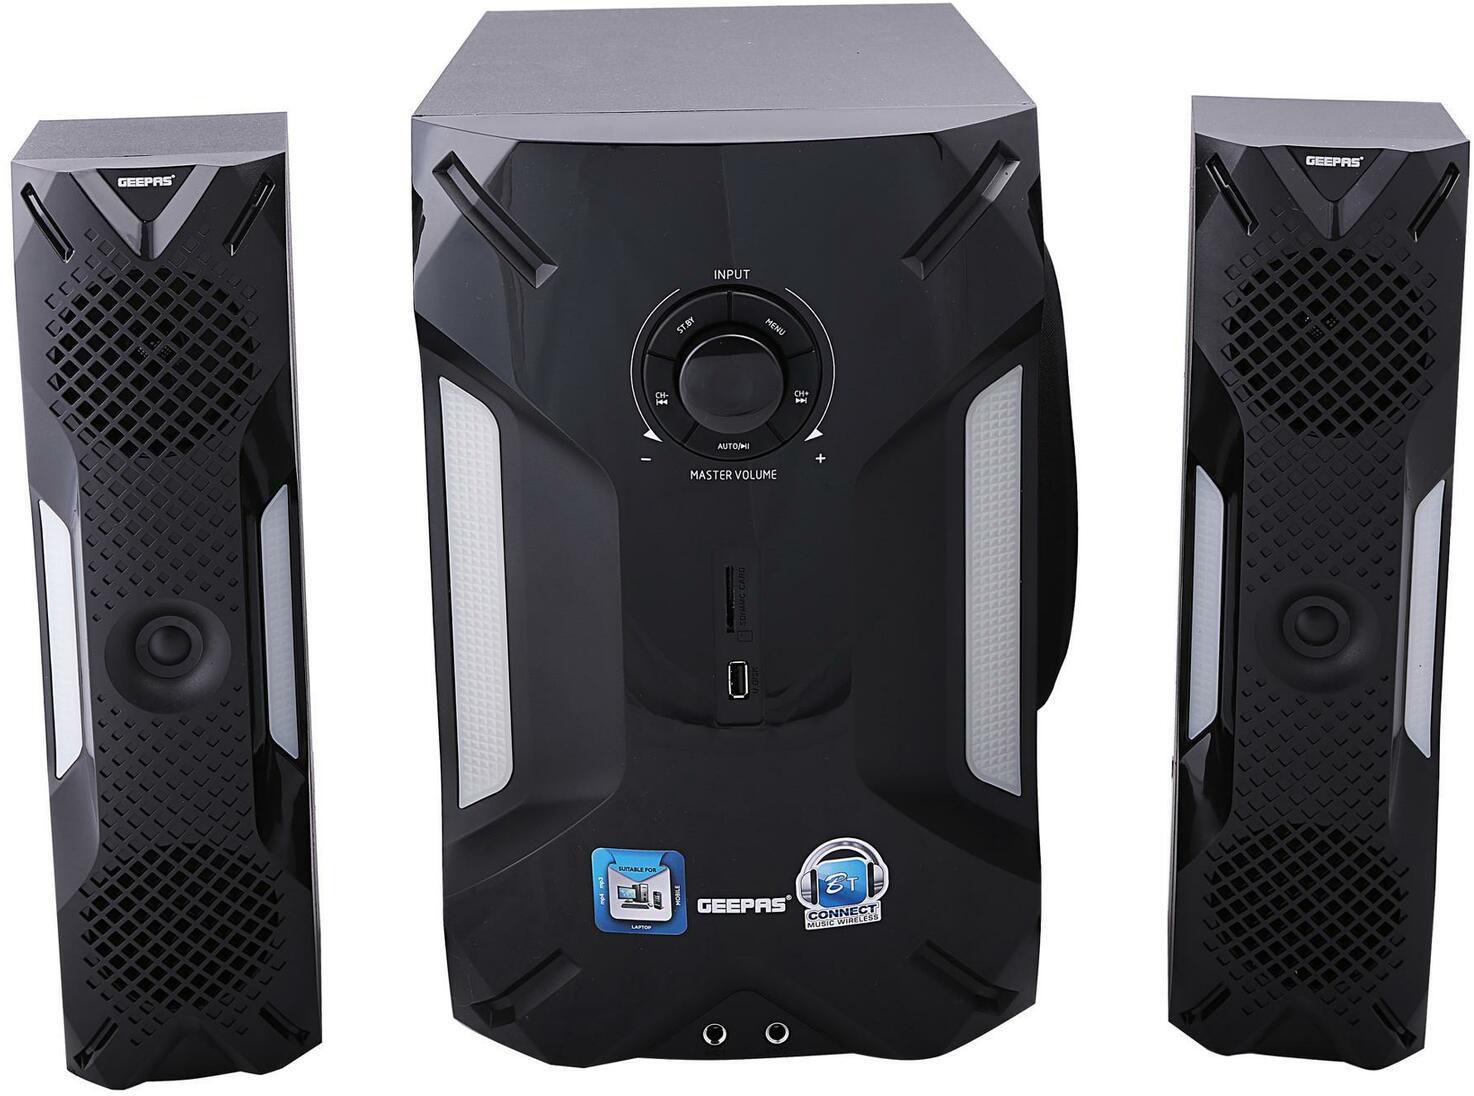 Geepas 2.1 Multimedia Speaker, 35000 Watts Peak Power, 8&quot; Woofer| USB, Bluetooth &amp; Multiple-Devise, Multiple Devise Inputs (Pc, Ps4, Xbox, Smartphone, Tablet, Music Player), 1 Year Warranty